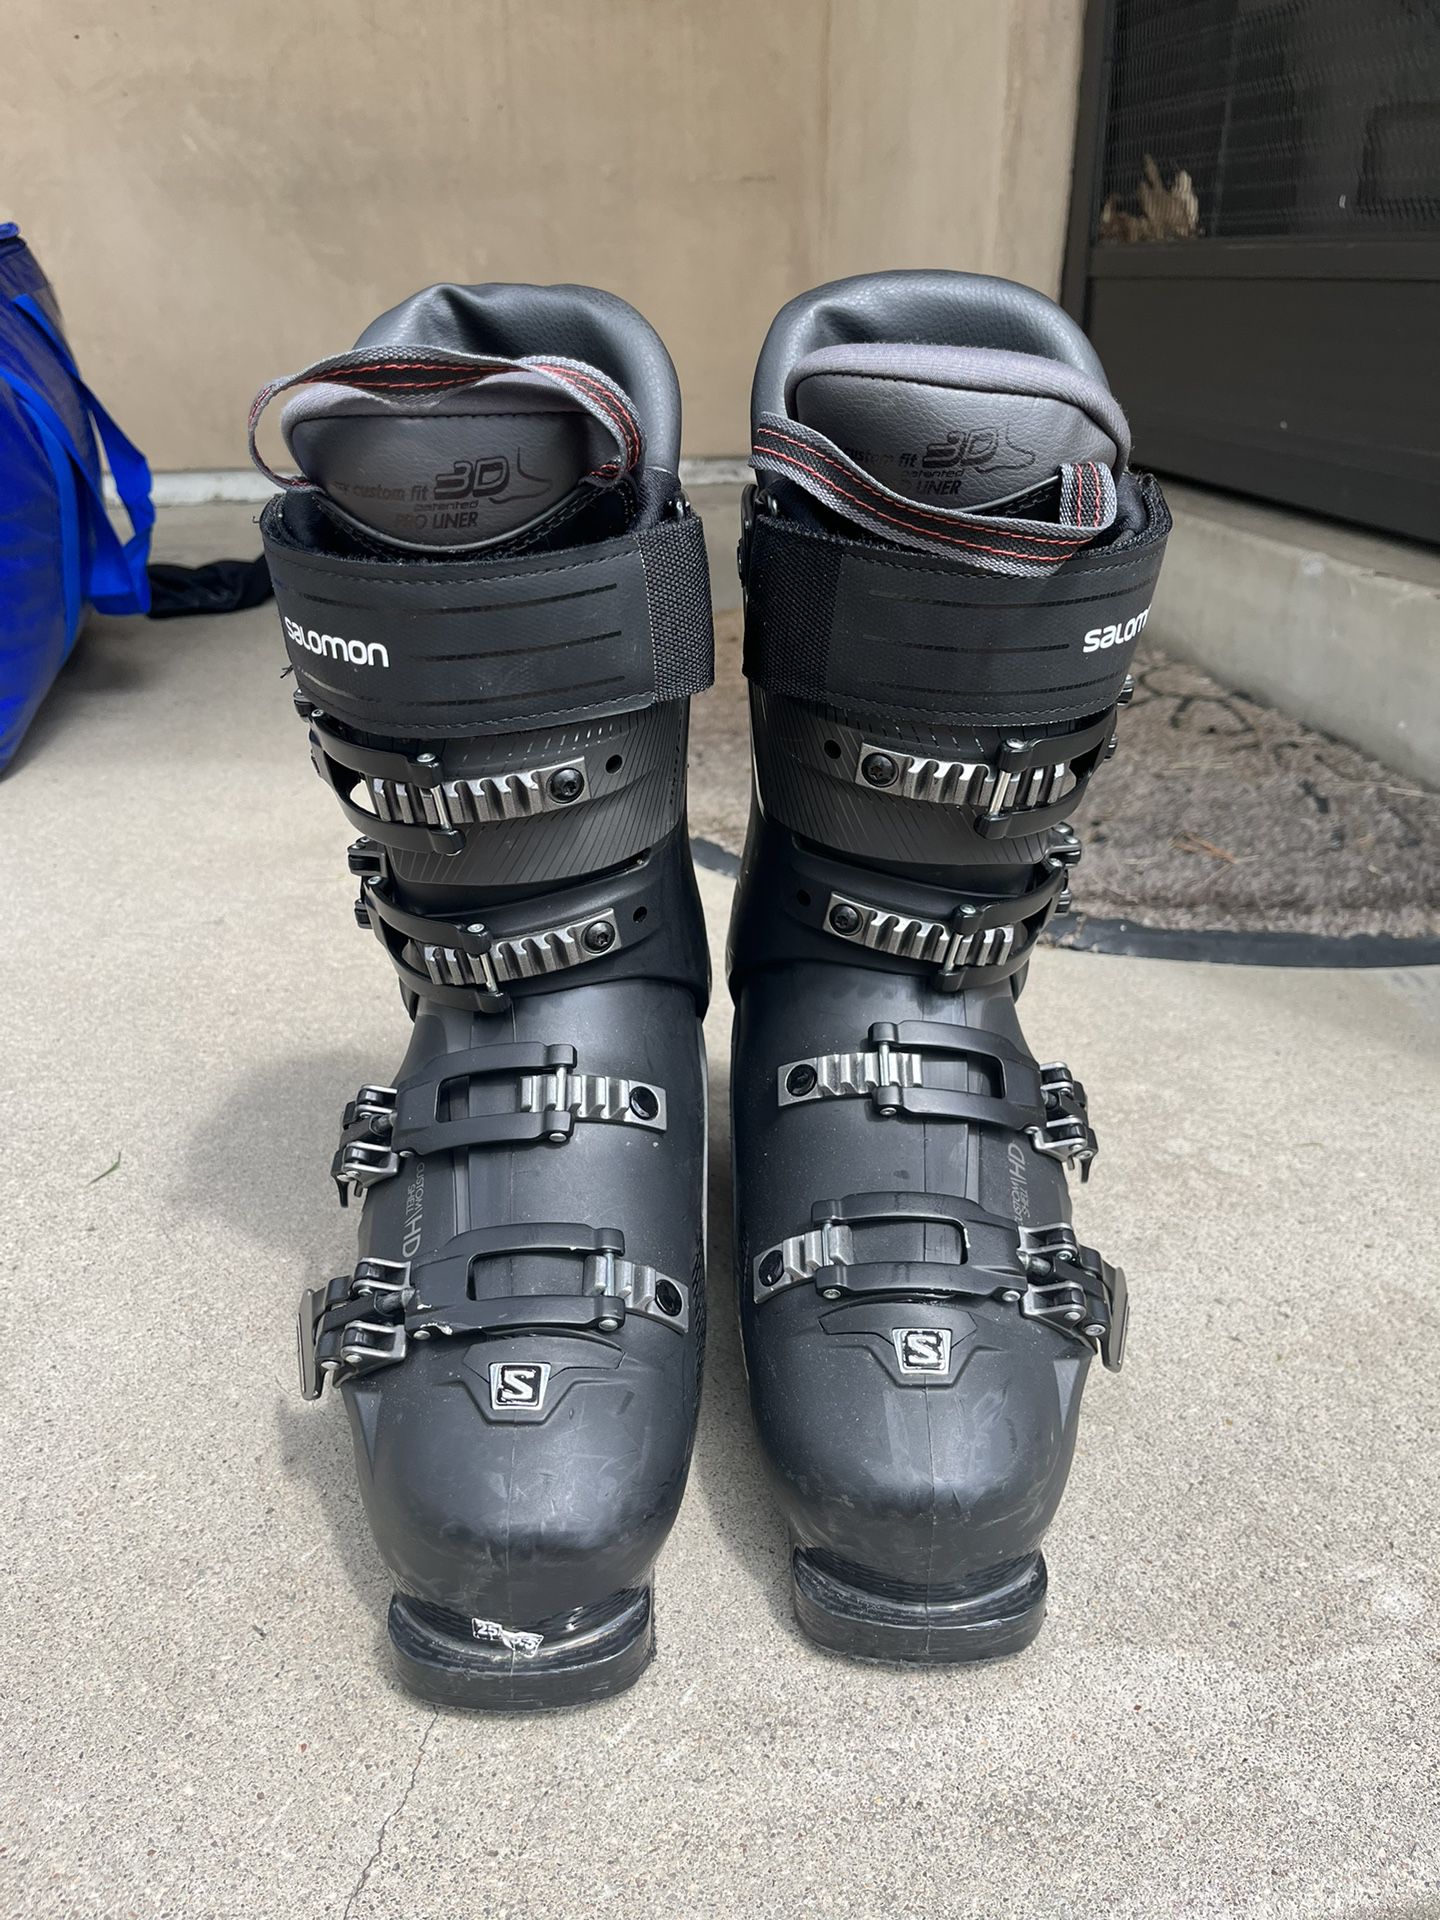 Salomon S Ski Boots Size 25/25.5 for Sale in CO OfferUp